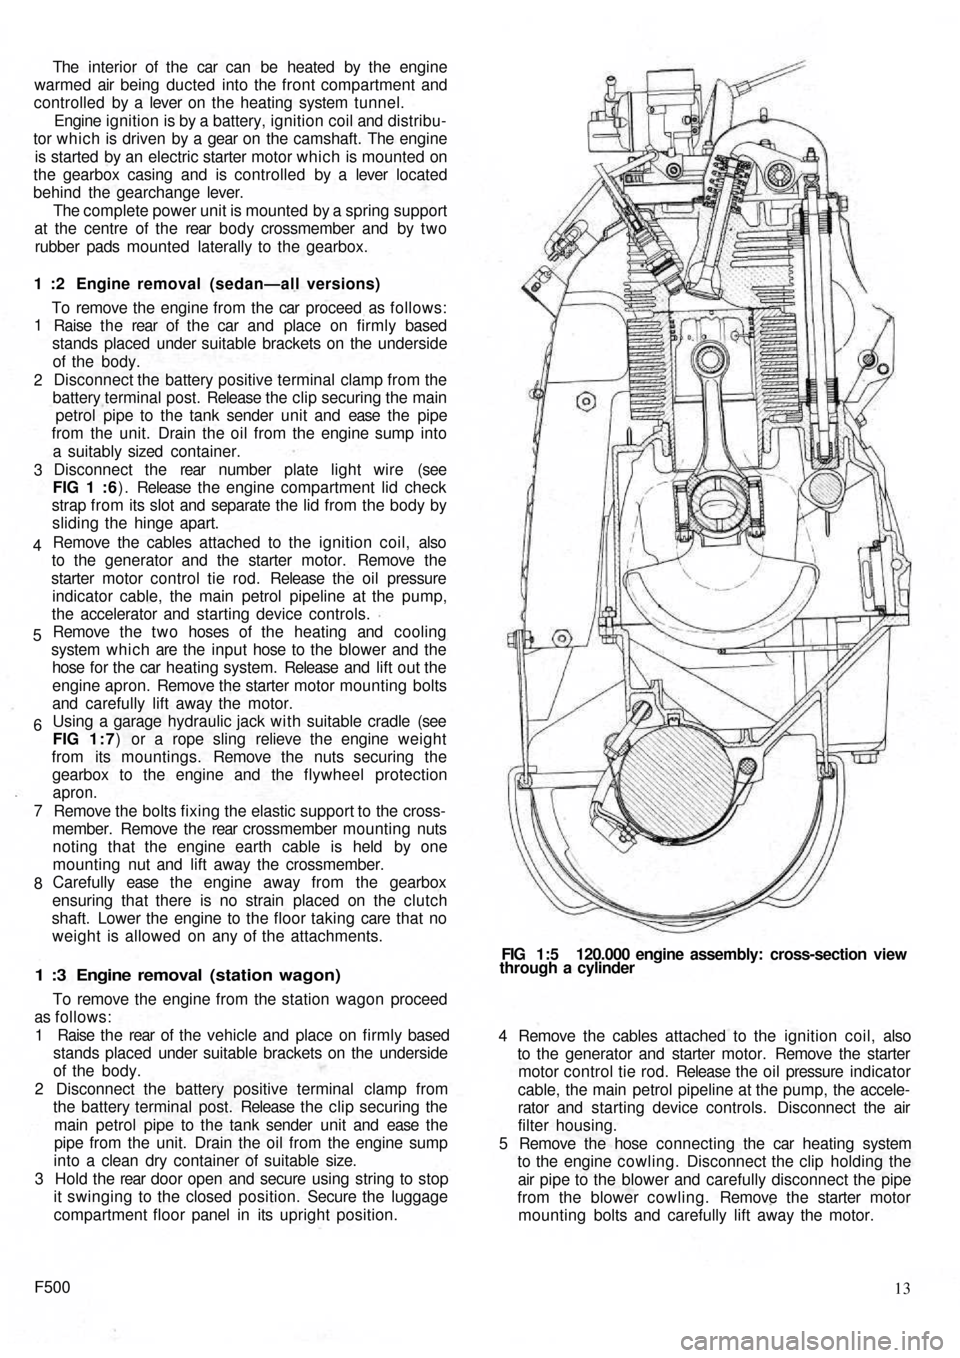 FIAT 500 1957 1.G Workshop Manual The  interior of the  car can  be heated by the engine
warmed air being ducted into the front compartment and
controlled  by a  lever on the heating system tunnel.
Engine ignition is by a battery, ign